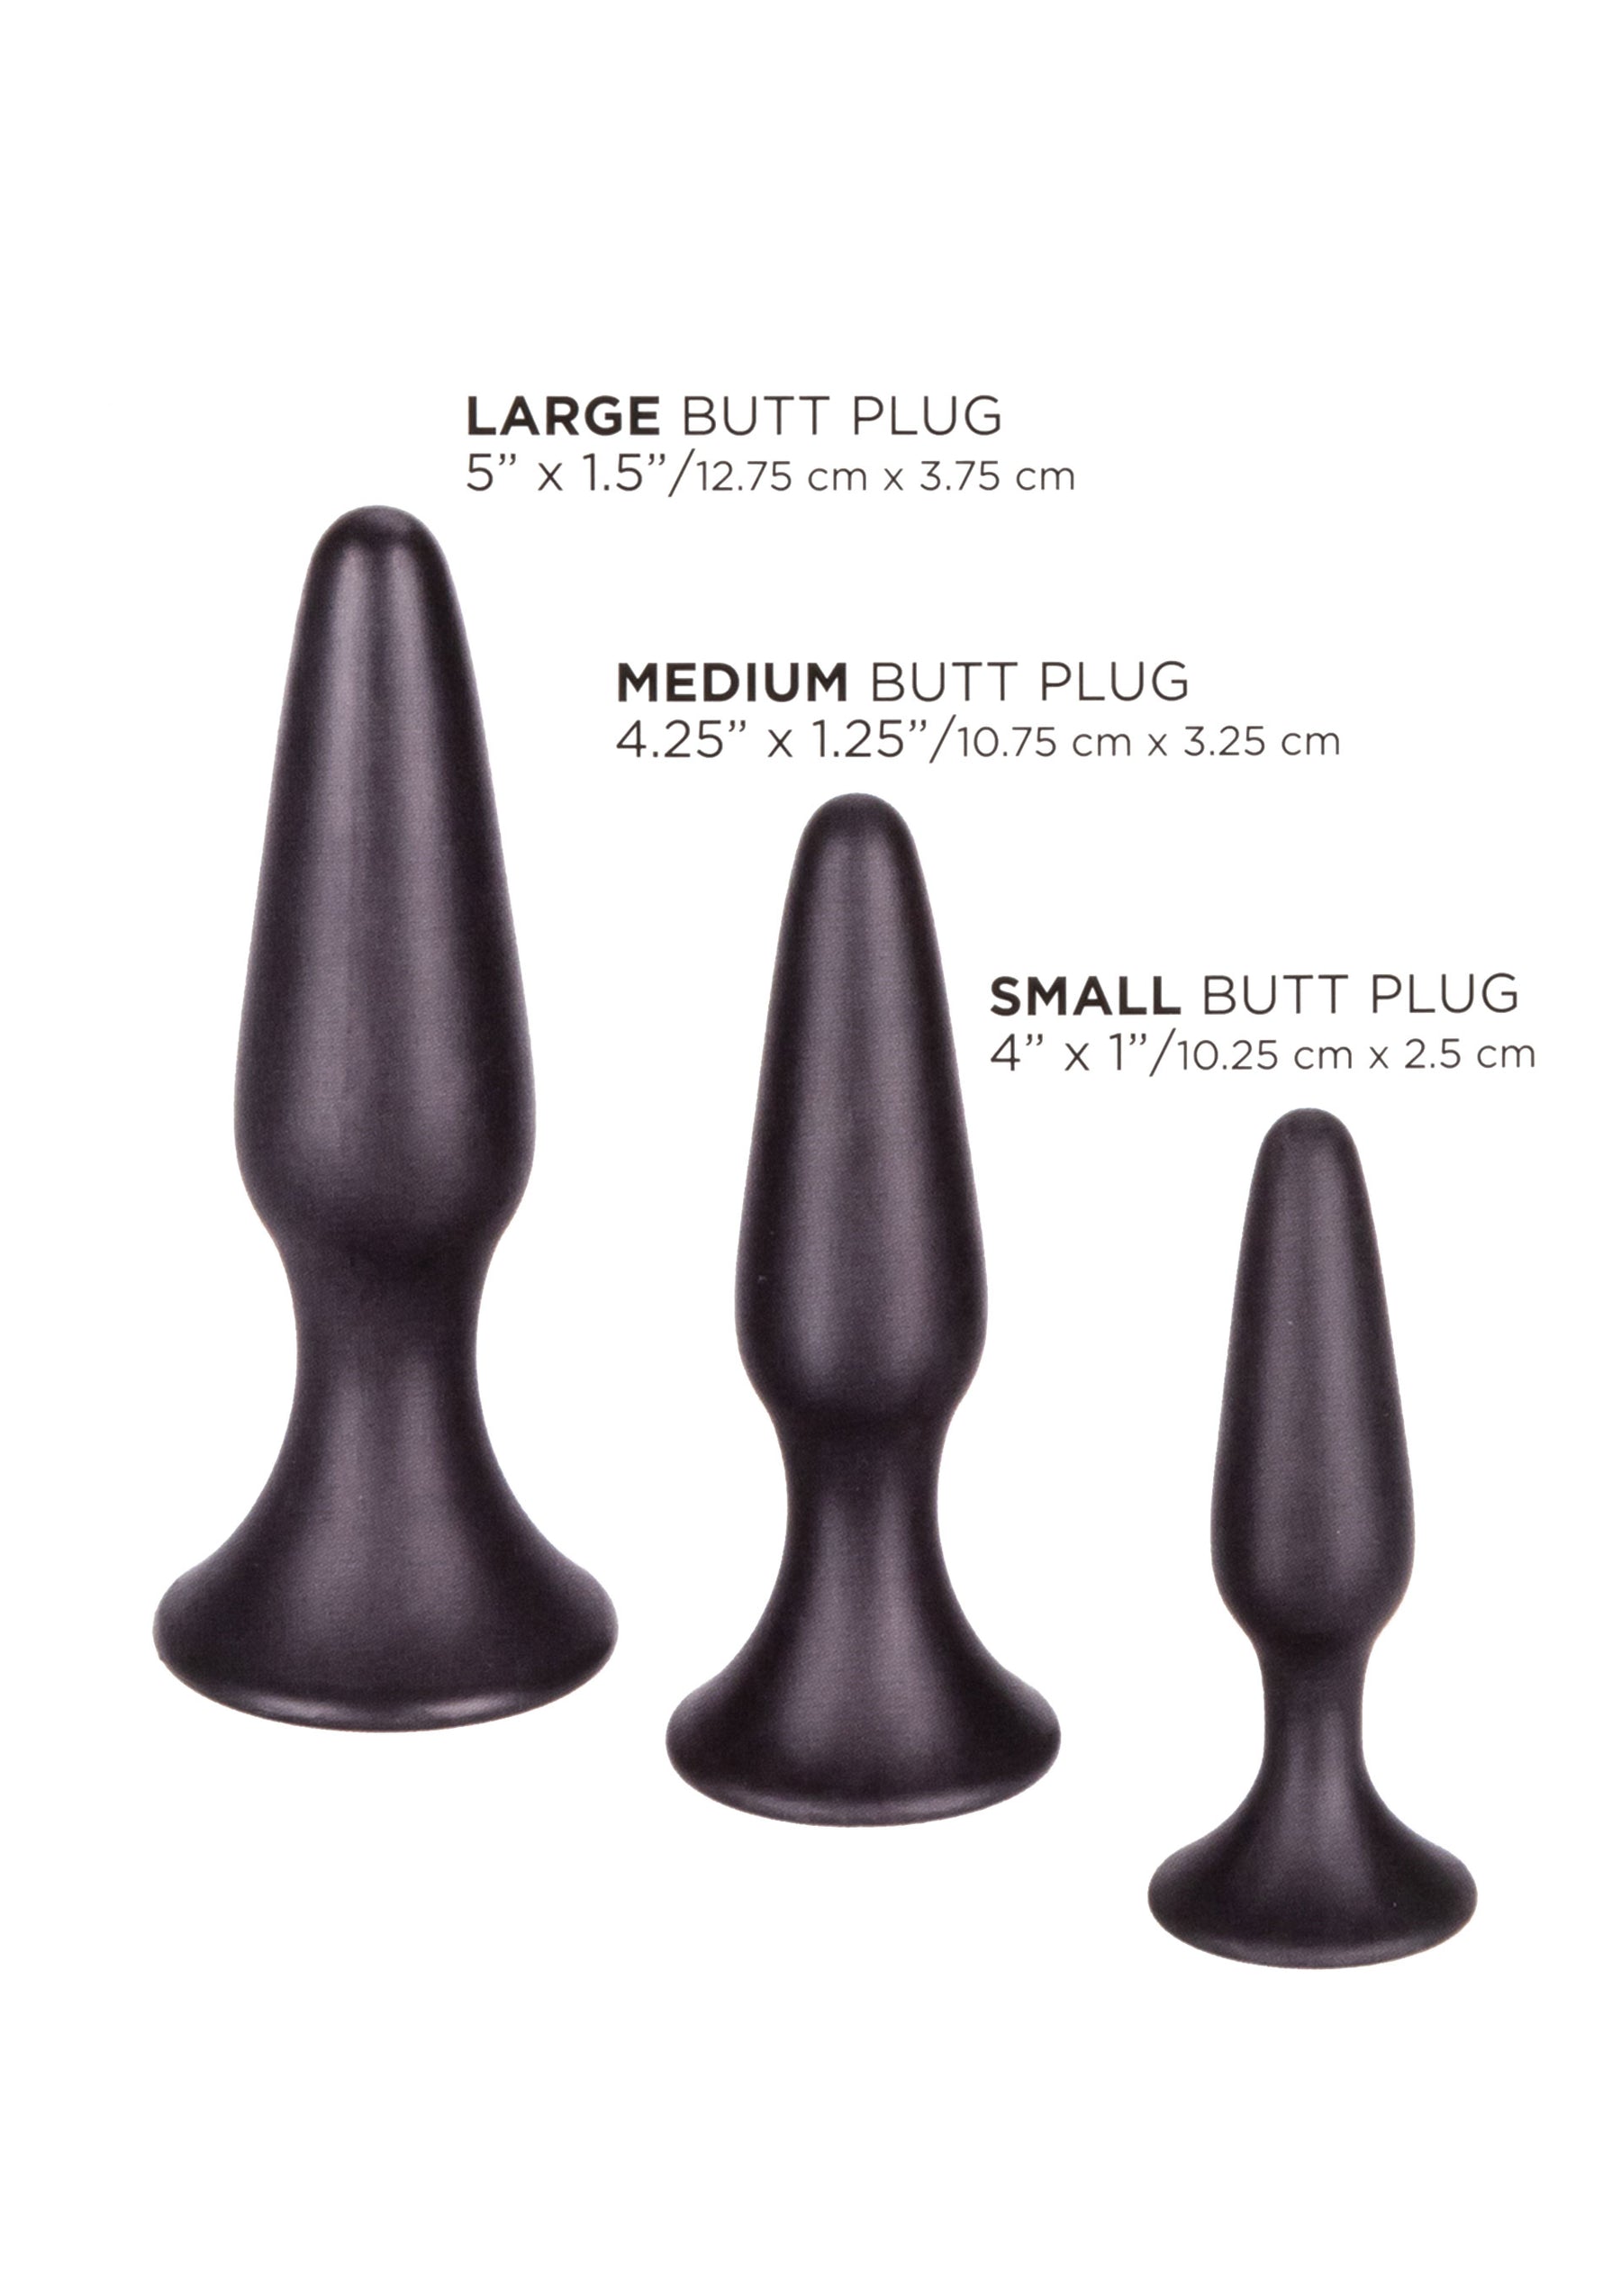 Silicone Anal Trainer Kit